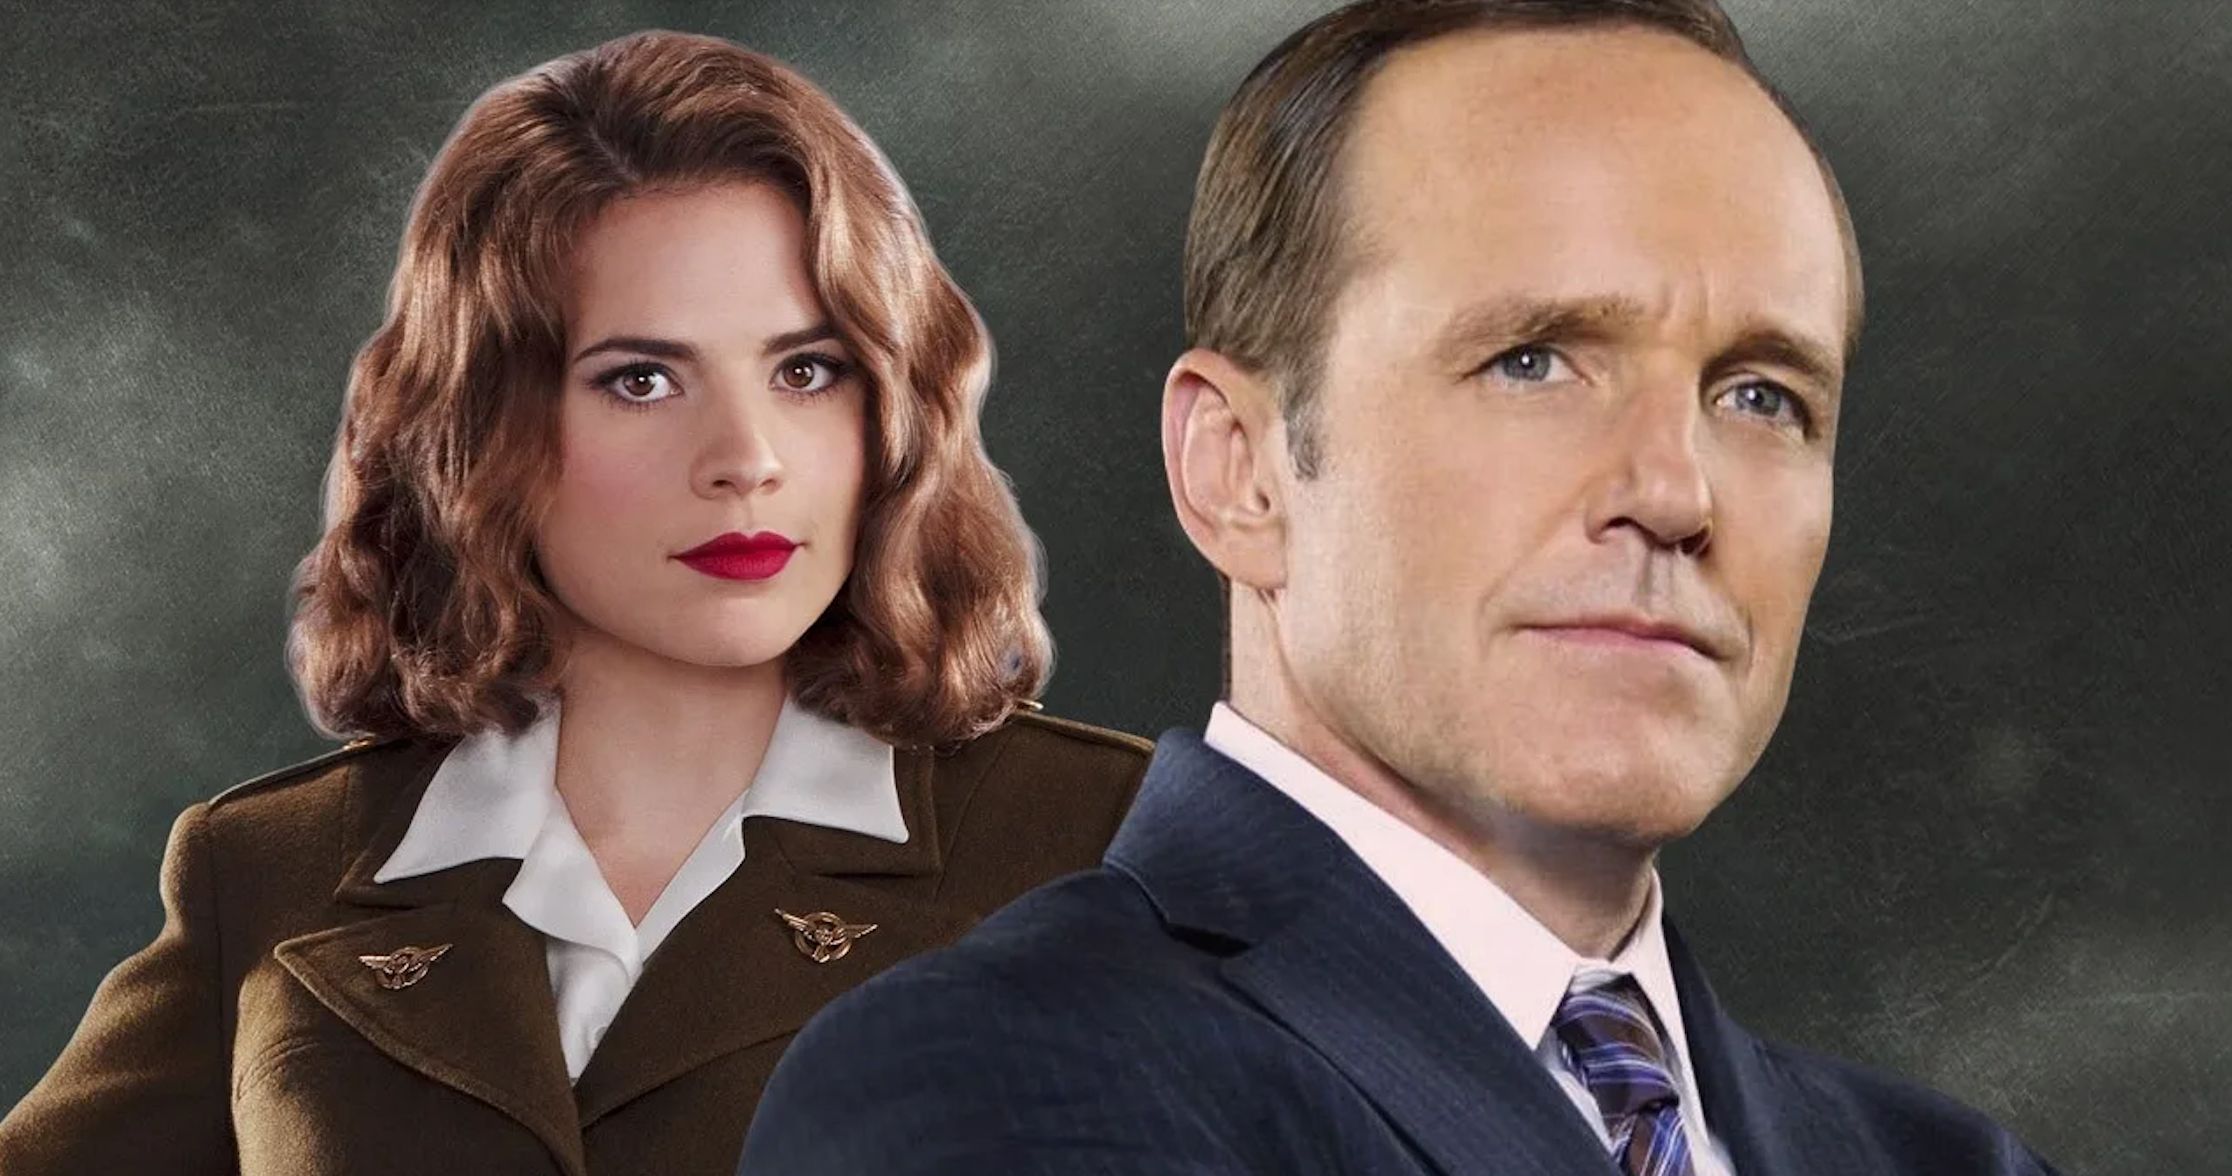 Did Disney+ Erase Agents of S.H.I.E.L.D. and Agent Carter from MCU Canon?